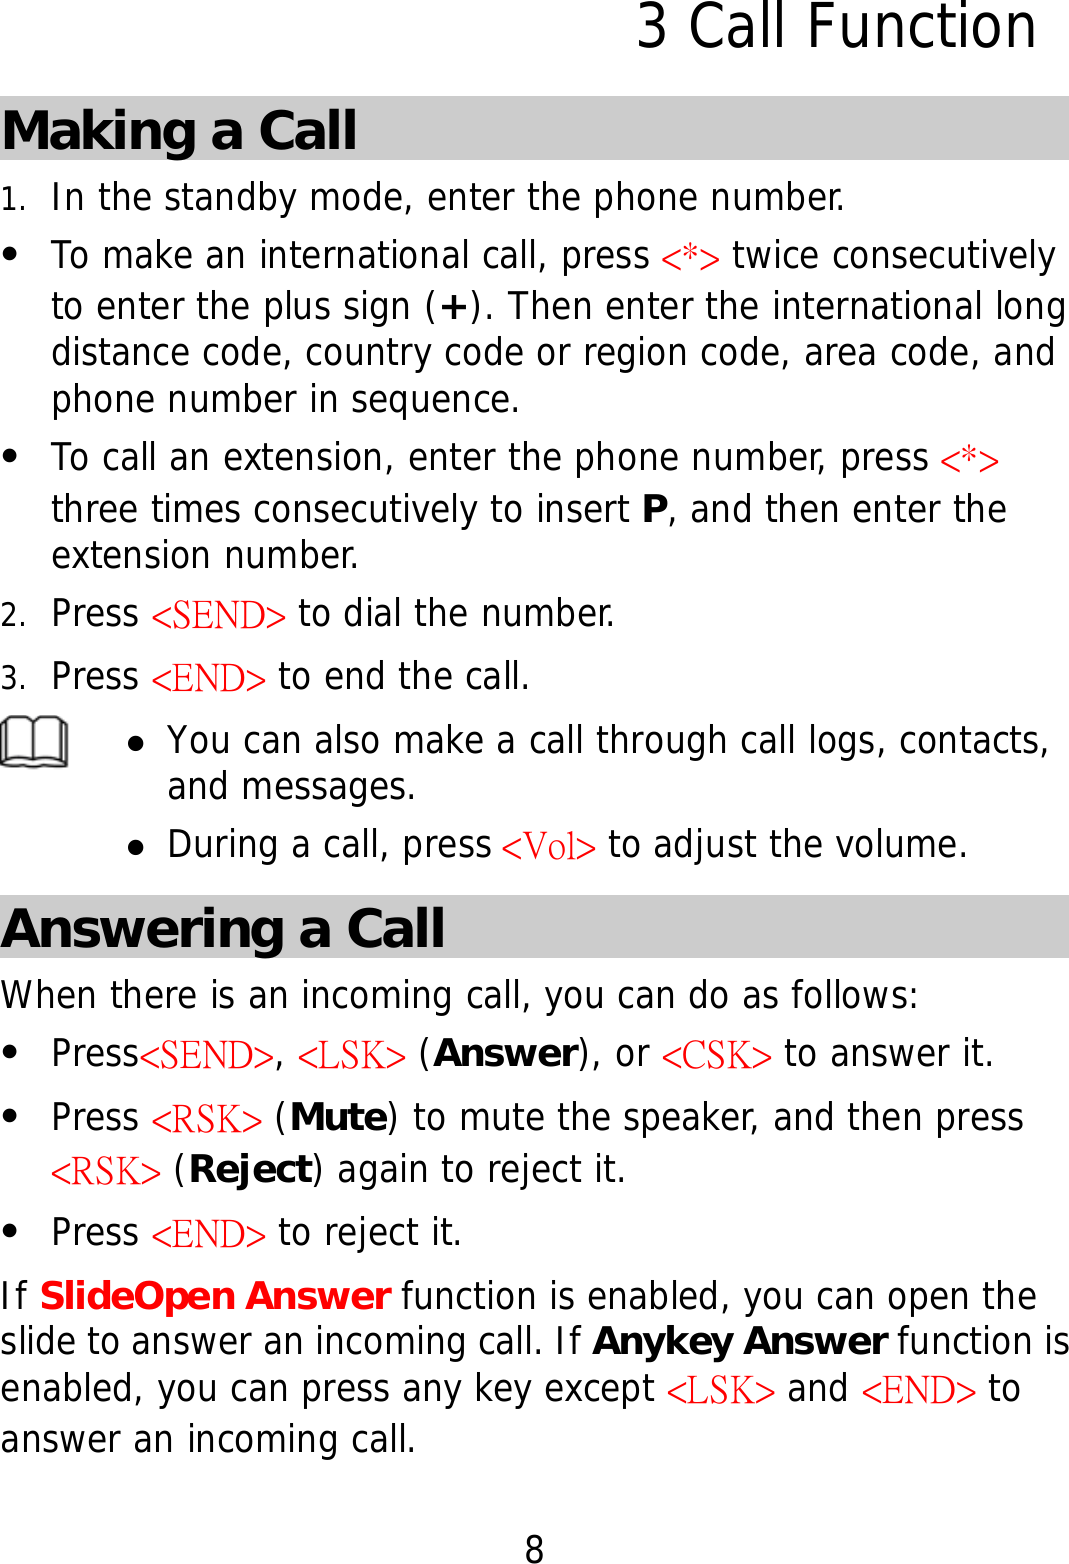 8 3 Call Function Making a Call 1. In the standby mode, enter the phone number. z To make an international call, press &lt;*&gt; twice consecutively to enter the plus sign (+). Then enter the international long distance code, country code or region code, area code, and phone number in sequence. z To call an extension, enter the phone number, press &lt;*&gt; three times consecutively to insert P, and then enter the extension number. 2. Press &lt;SEND&gt; to dial the number. 3. Press &lt;END&gt; to end the call.  z You can also make a call through call logs, contacts, and messages. z During a call, press &lt;Vol&gt; to adjust the volume. Answering a Call When there is an incoming call, you can do as follows: z Press&lt;SEND&gt;, &lt;LSK&gt; (Answer), or &lt;CSK&gt; to answer it. z Press &lt;RSK&gt; (Mute) to mute the speaker, and then press &lt;RSK&gt; (Reject) again to reject it. z Press &lt;END&gt; to reject it. If SlideOpen Answer function is enabled, you can open the slide to answer an incoming call. If Anykey Answer function is enabled, you can press any key except &lt;LSK&gt; and &lt;END&gt; to answer an incoming call. 